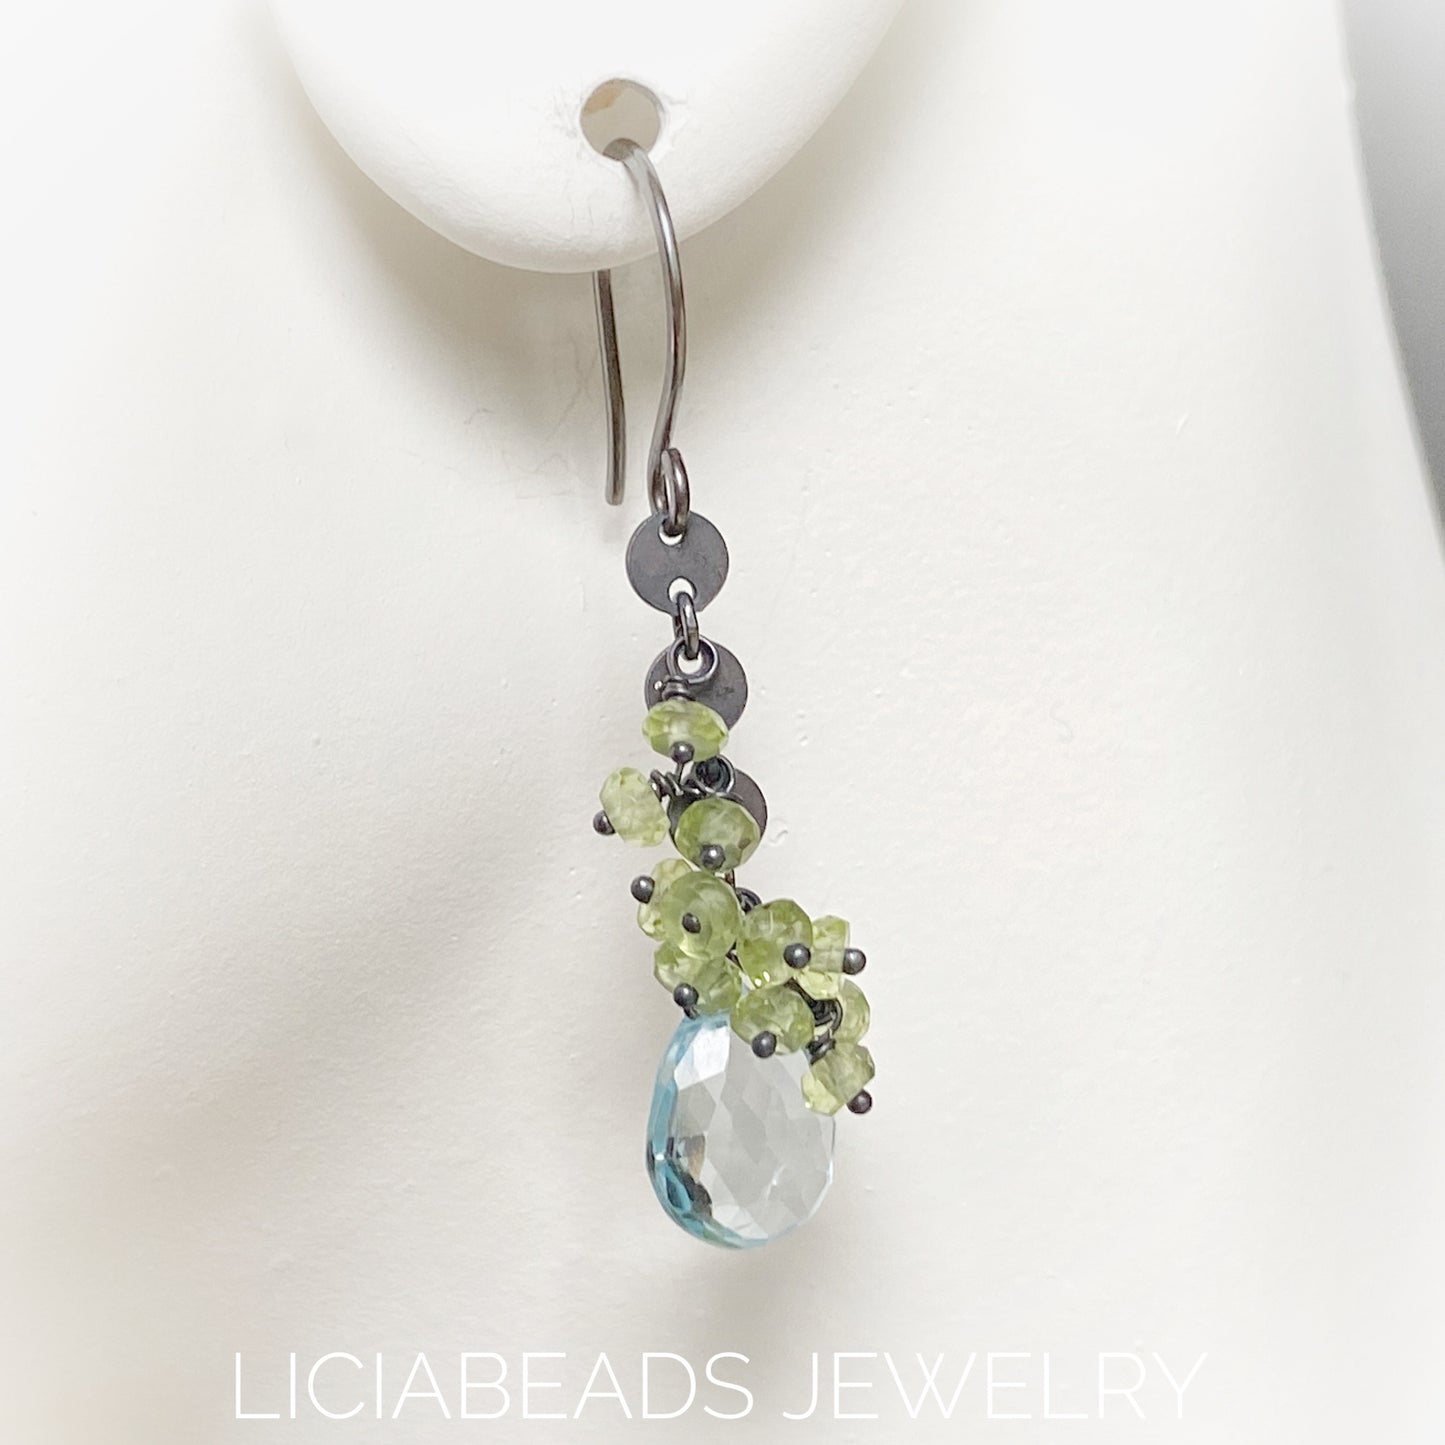 Blue Topaz and peridot gemstones on blackened sterling silver